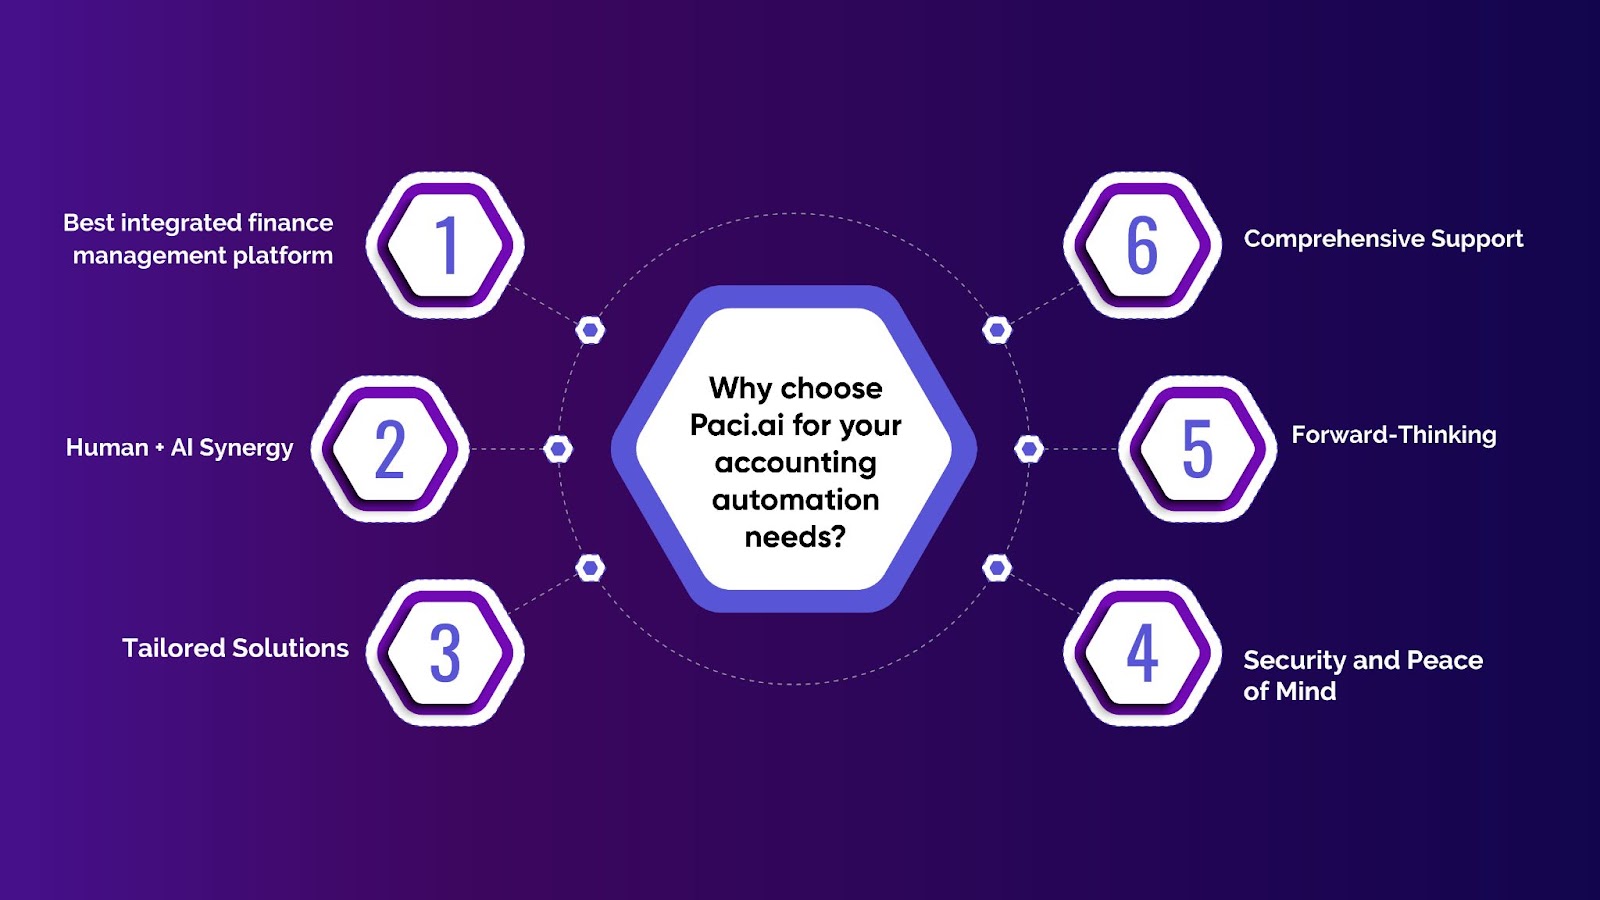 Why choose Paci.ai for your accounting automation needs? 